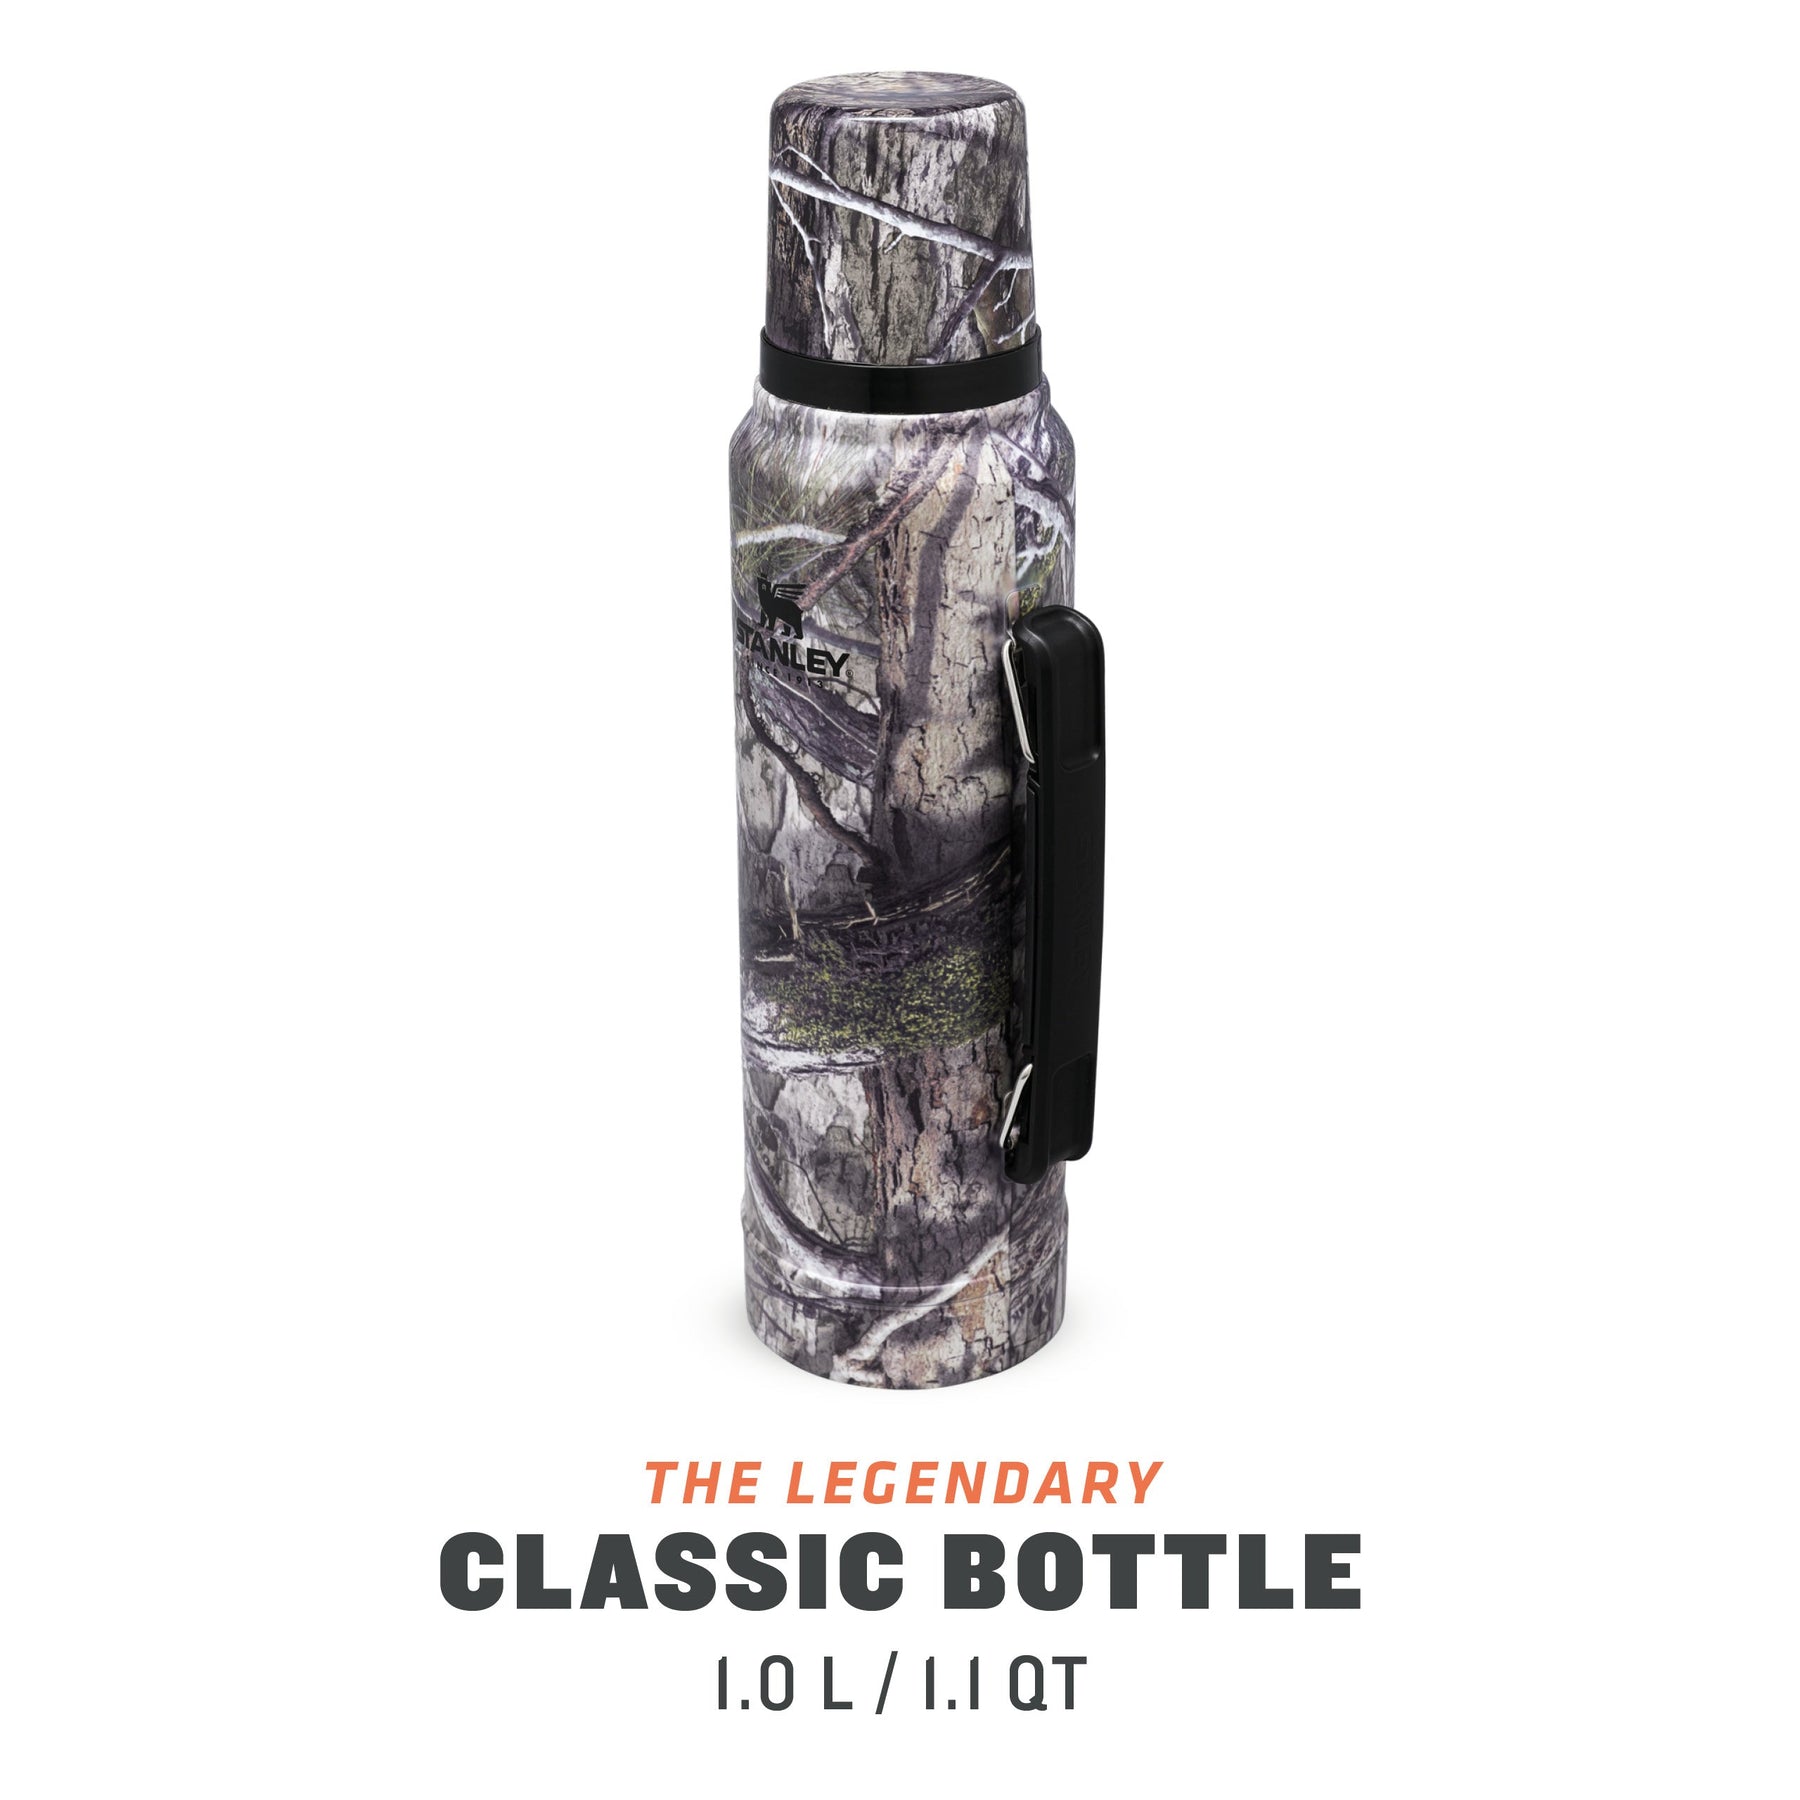 https://cdn.shopify.com/s/files/1/0516/4564/5000/products/Stanley-TheLegendaryClassicBottle1.0L_1.1QT-CountryDNA-2_1800x1800.jpg?v=1699055760